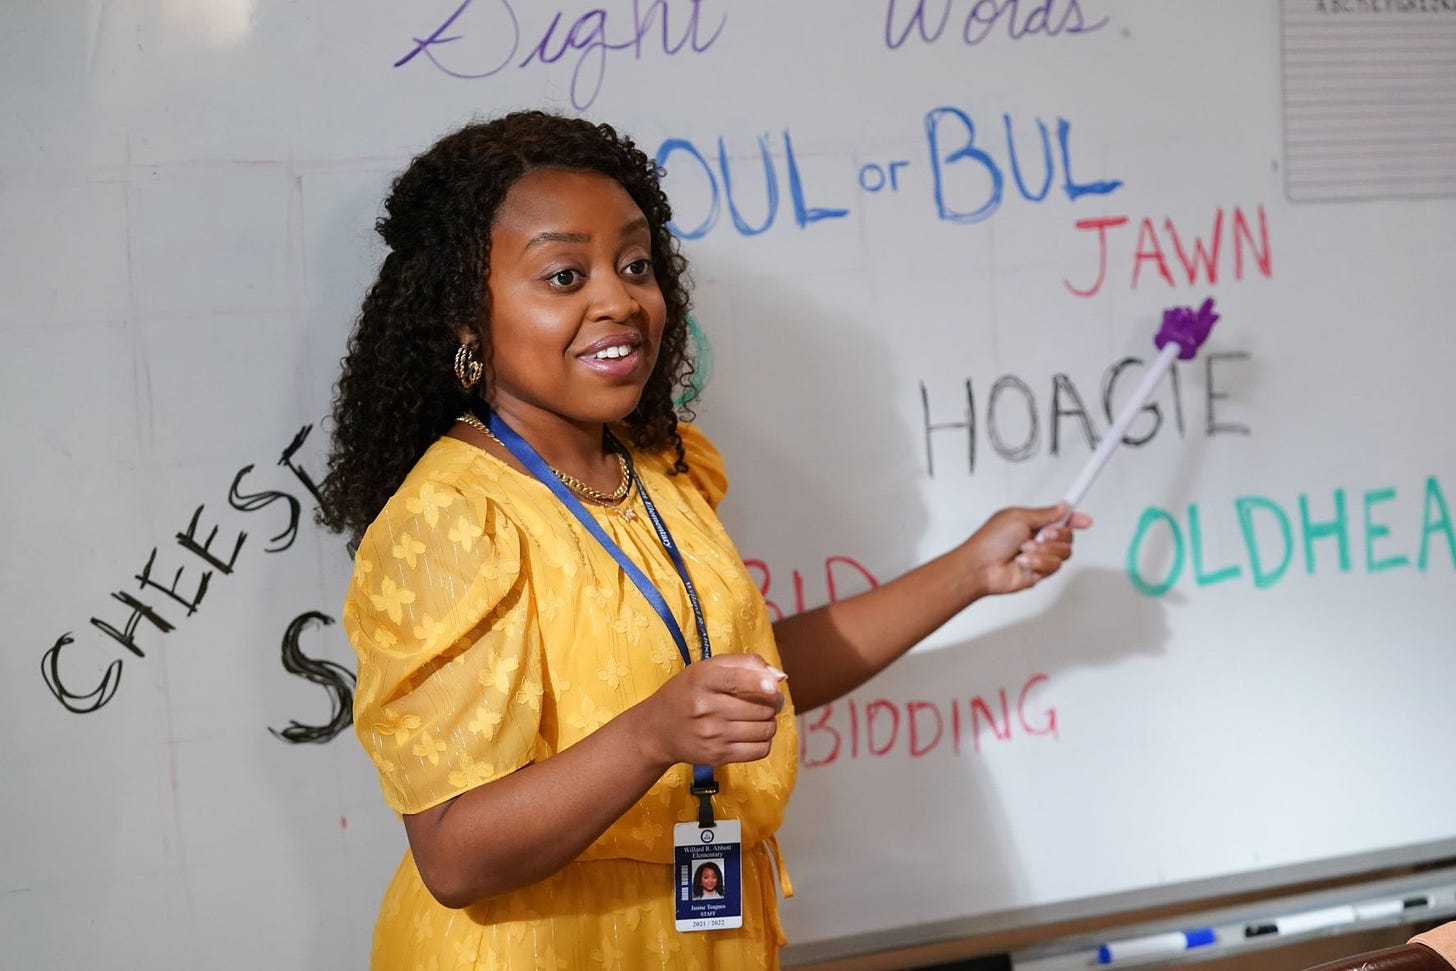 A black woman, played by Quinta Brunson, stands in front of a whiteboard full of Philadelphia slang words like "hoagie" and "jawn"